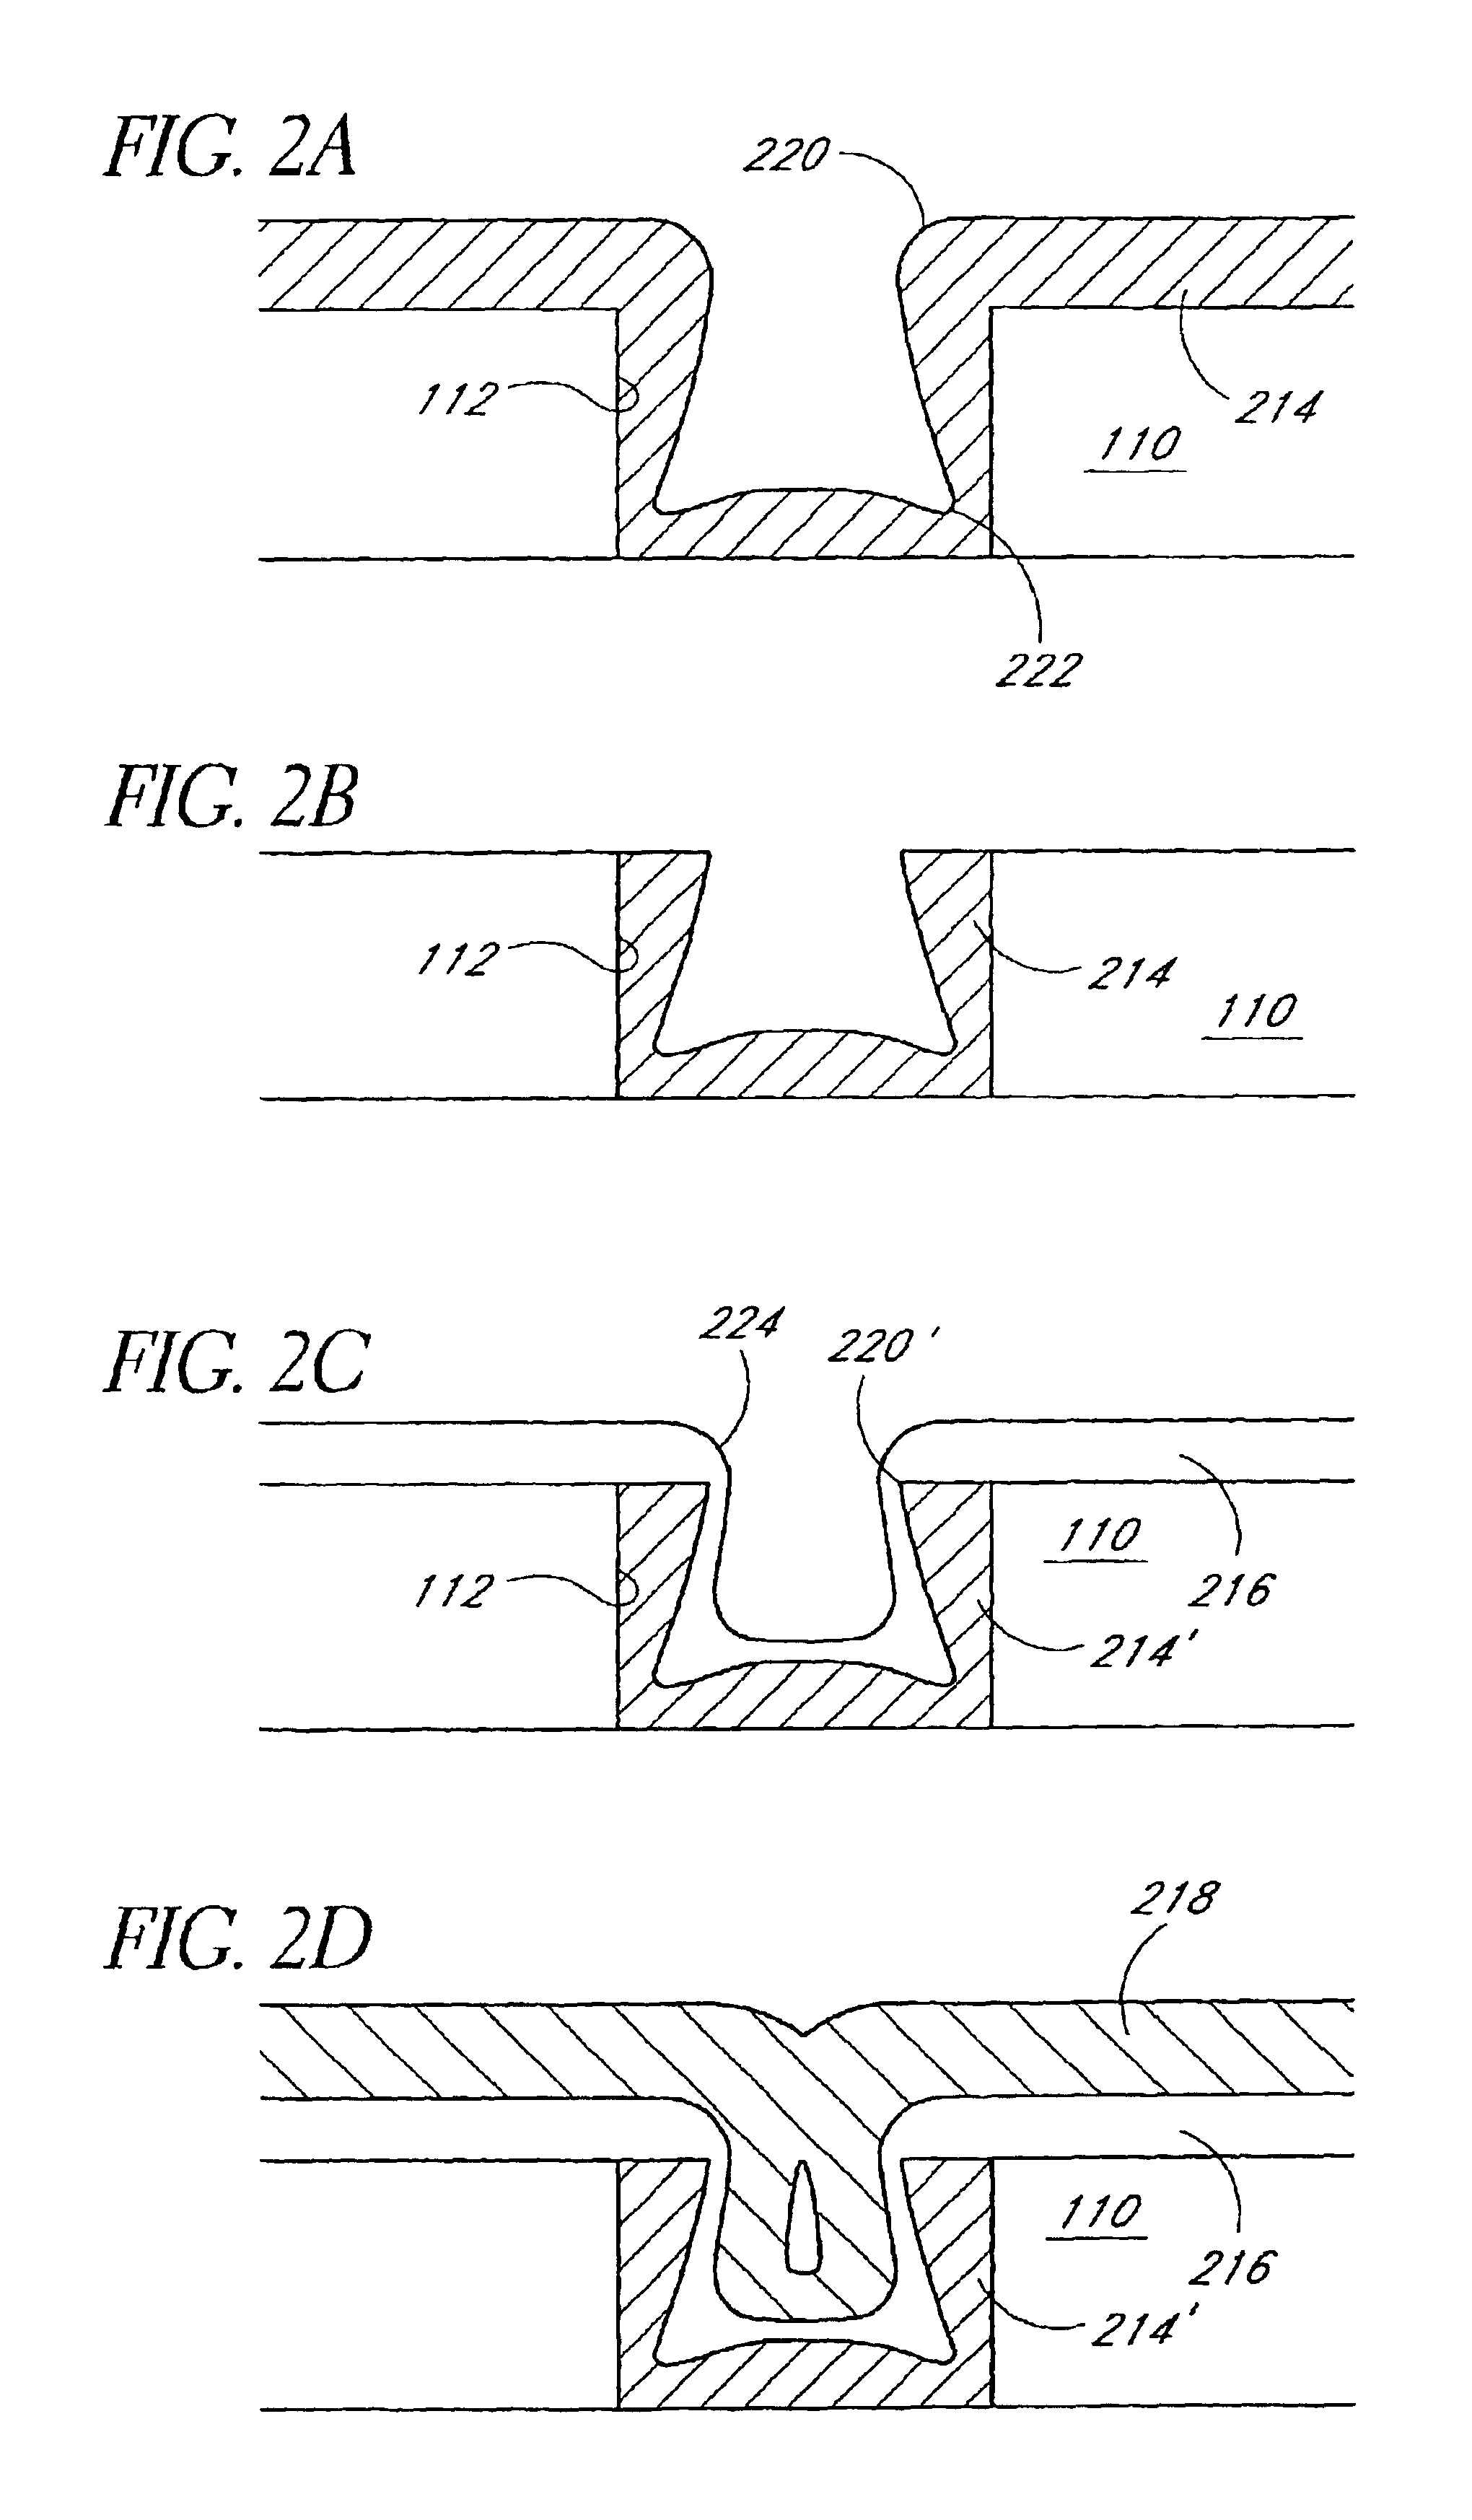 Integrated capacitors fabricated with conductive metal oxides